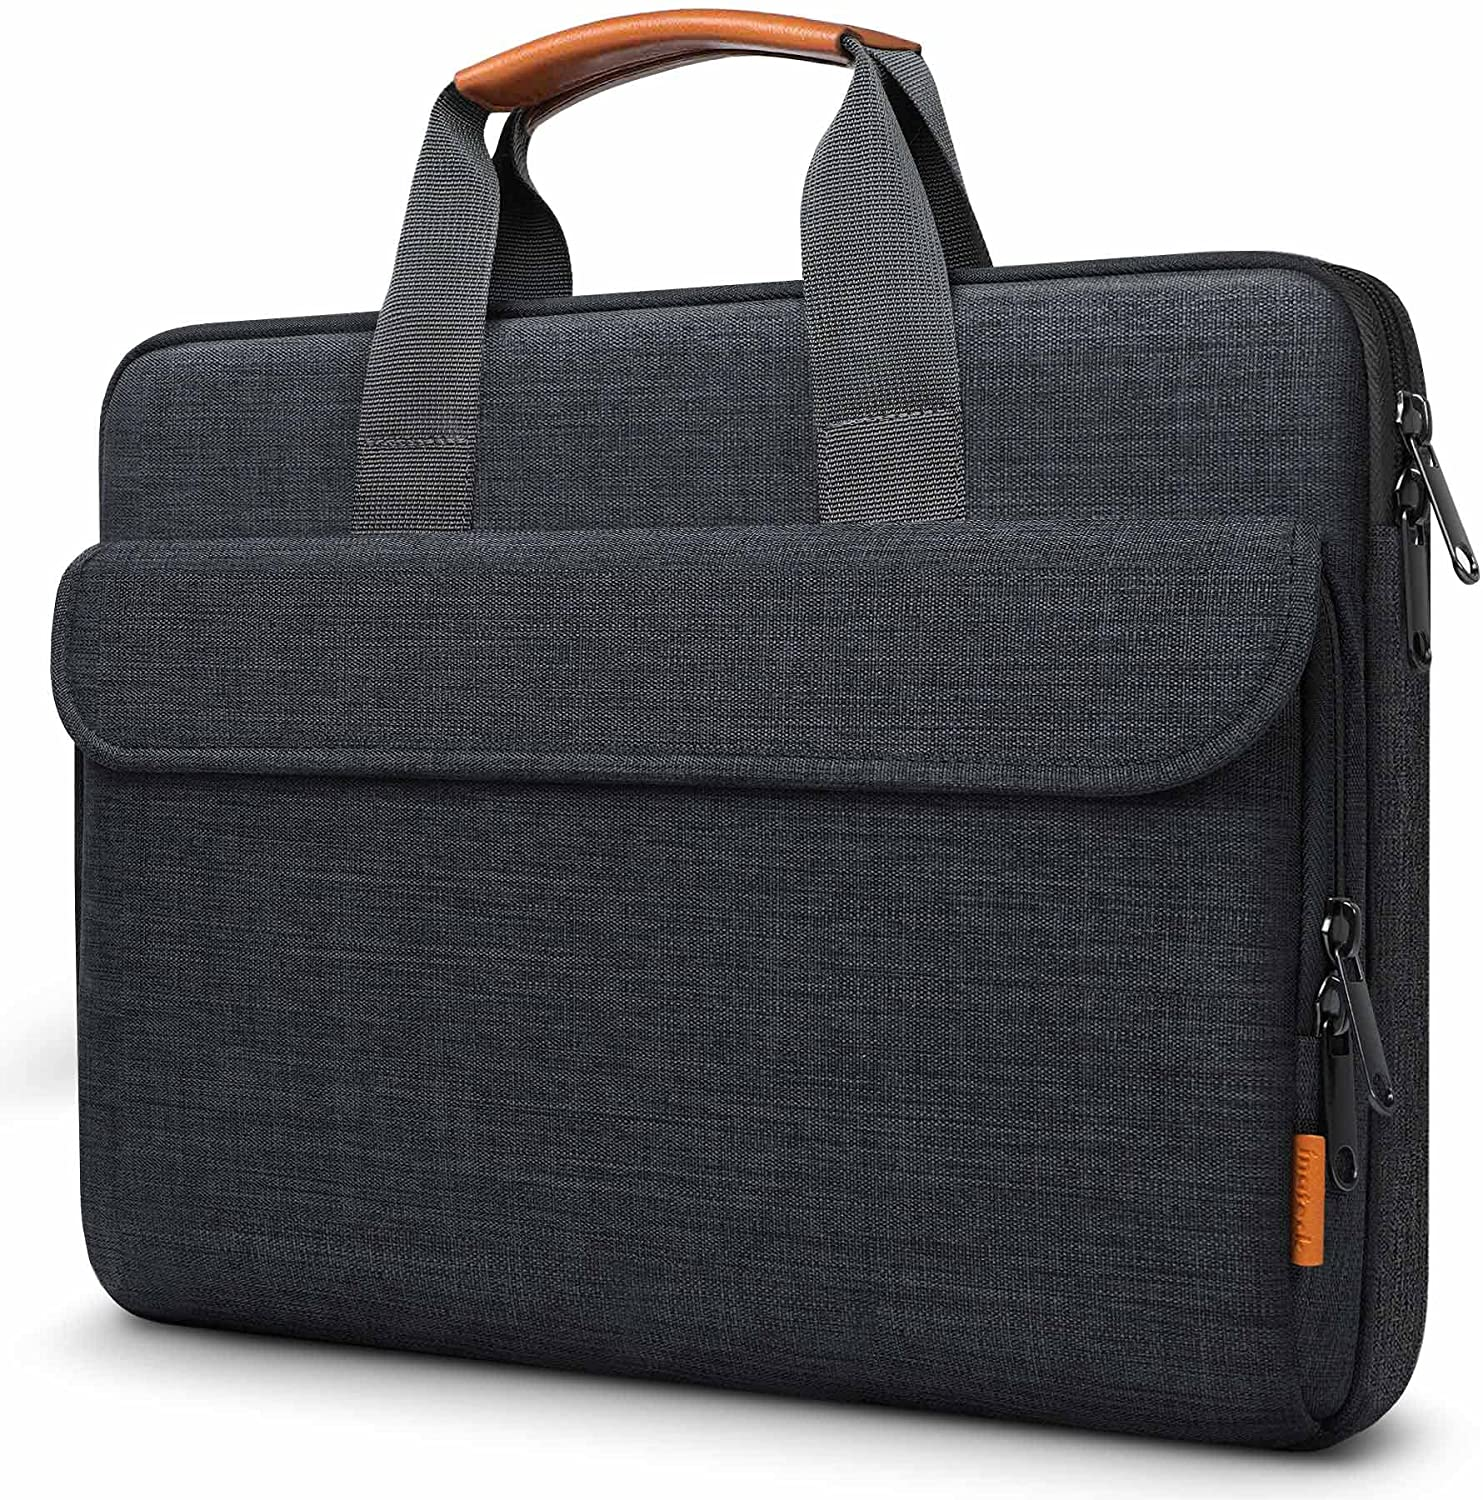 INATECK Laptoptasche Air/Pro, Dell, black Sleeve Apple, Hülle HUAWEI, Laptop MacBook Sony, Pro, für Laptophülle Laptoptasche 13 für XPS13, ASUS, Acer, Aktentasche Microsoft HP, Case Toshiba, Polyester, Surface